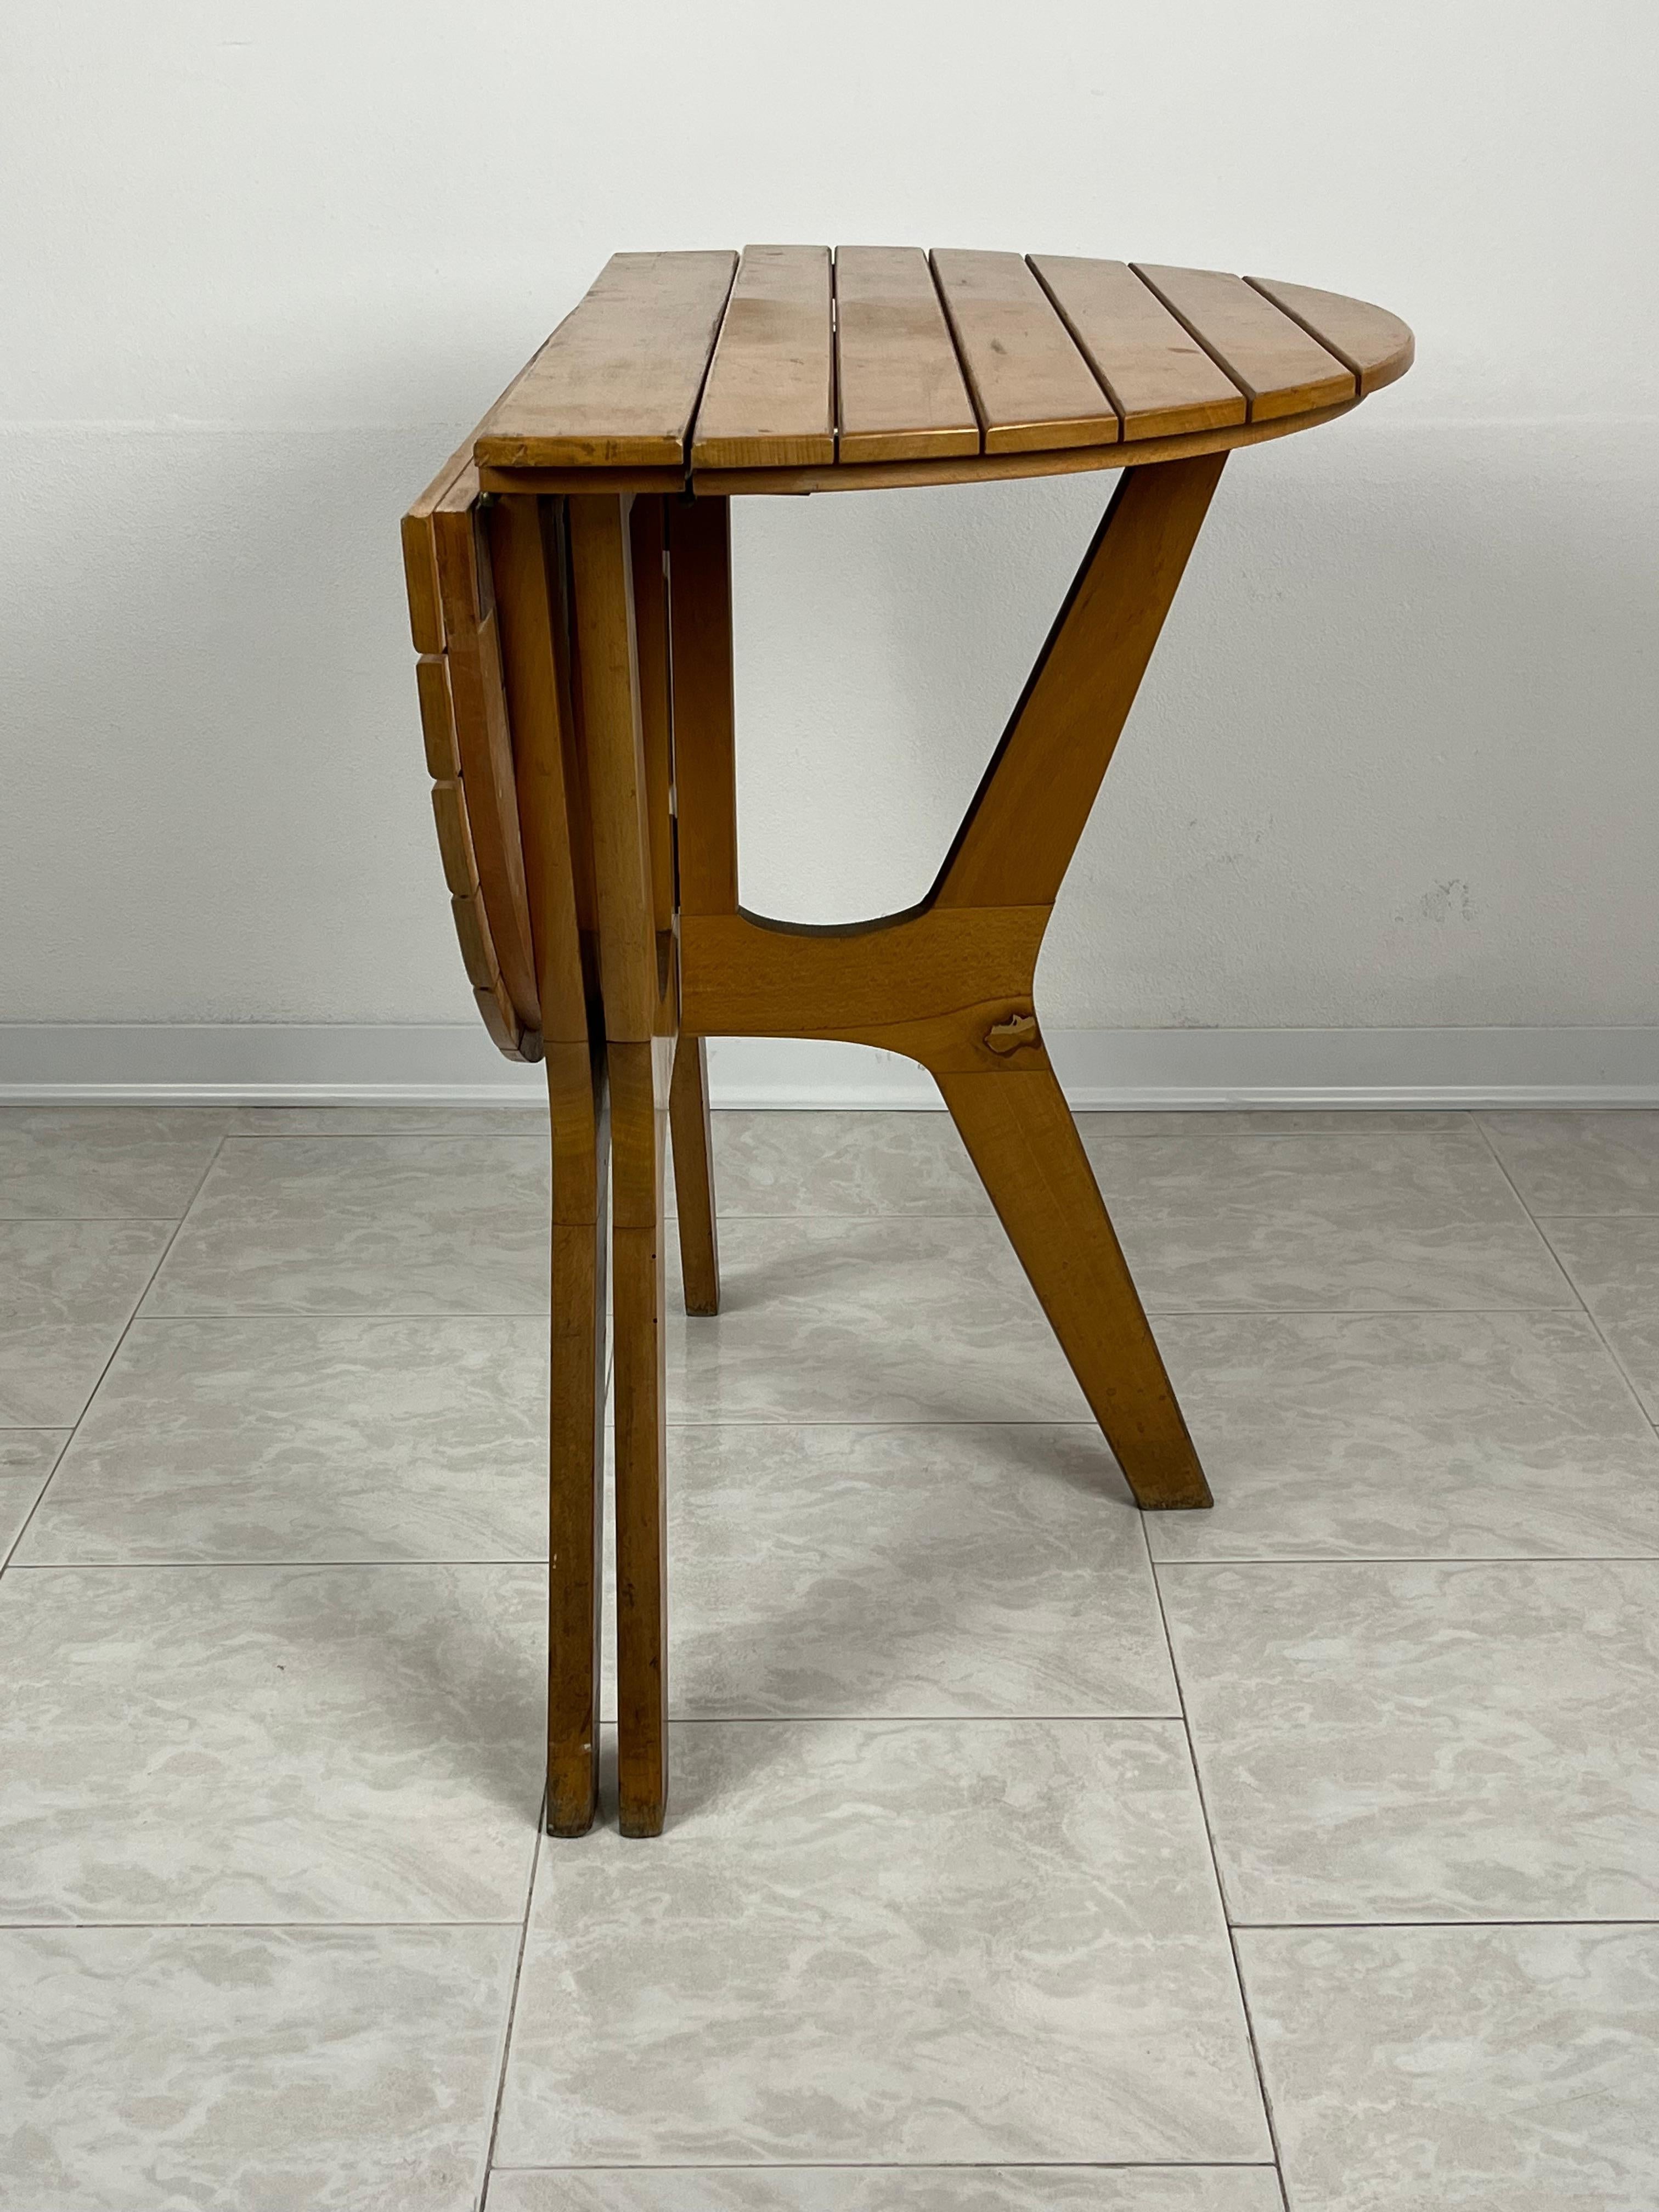 Other Folding Table in Maple Wood, Fada Asiago, Italy, 1976 For Sale